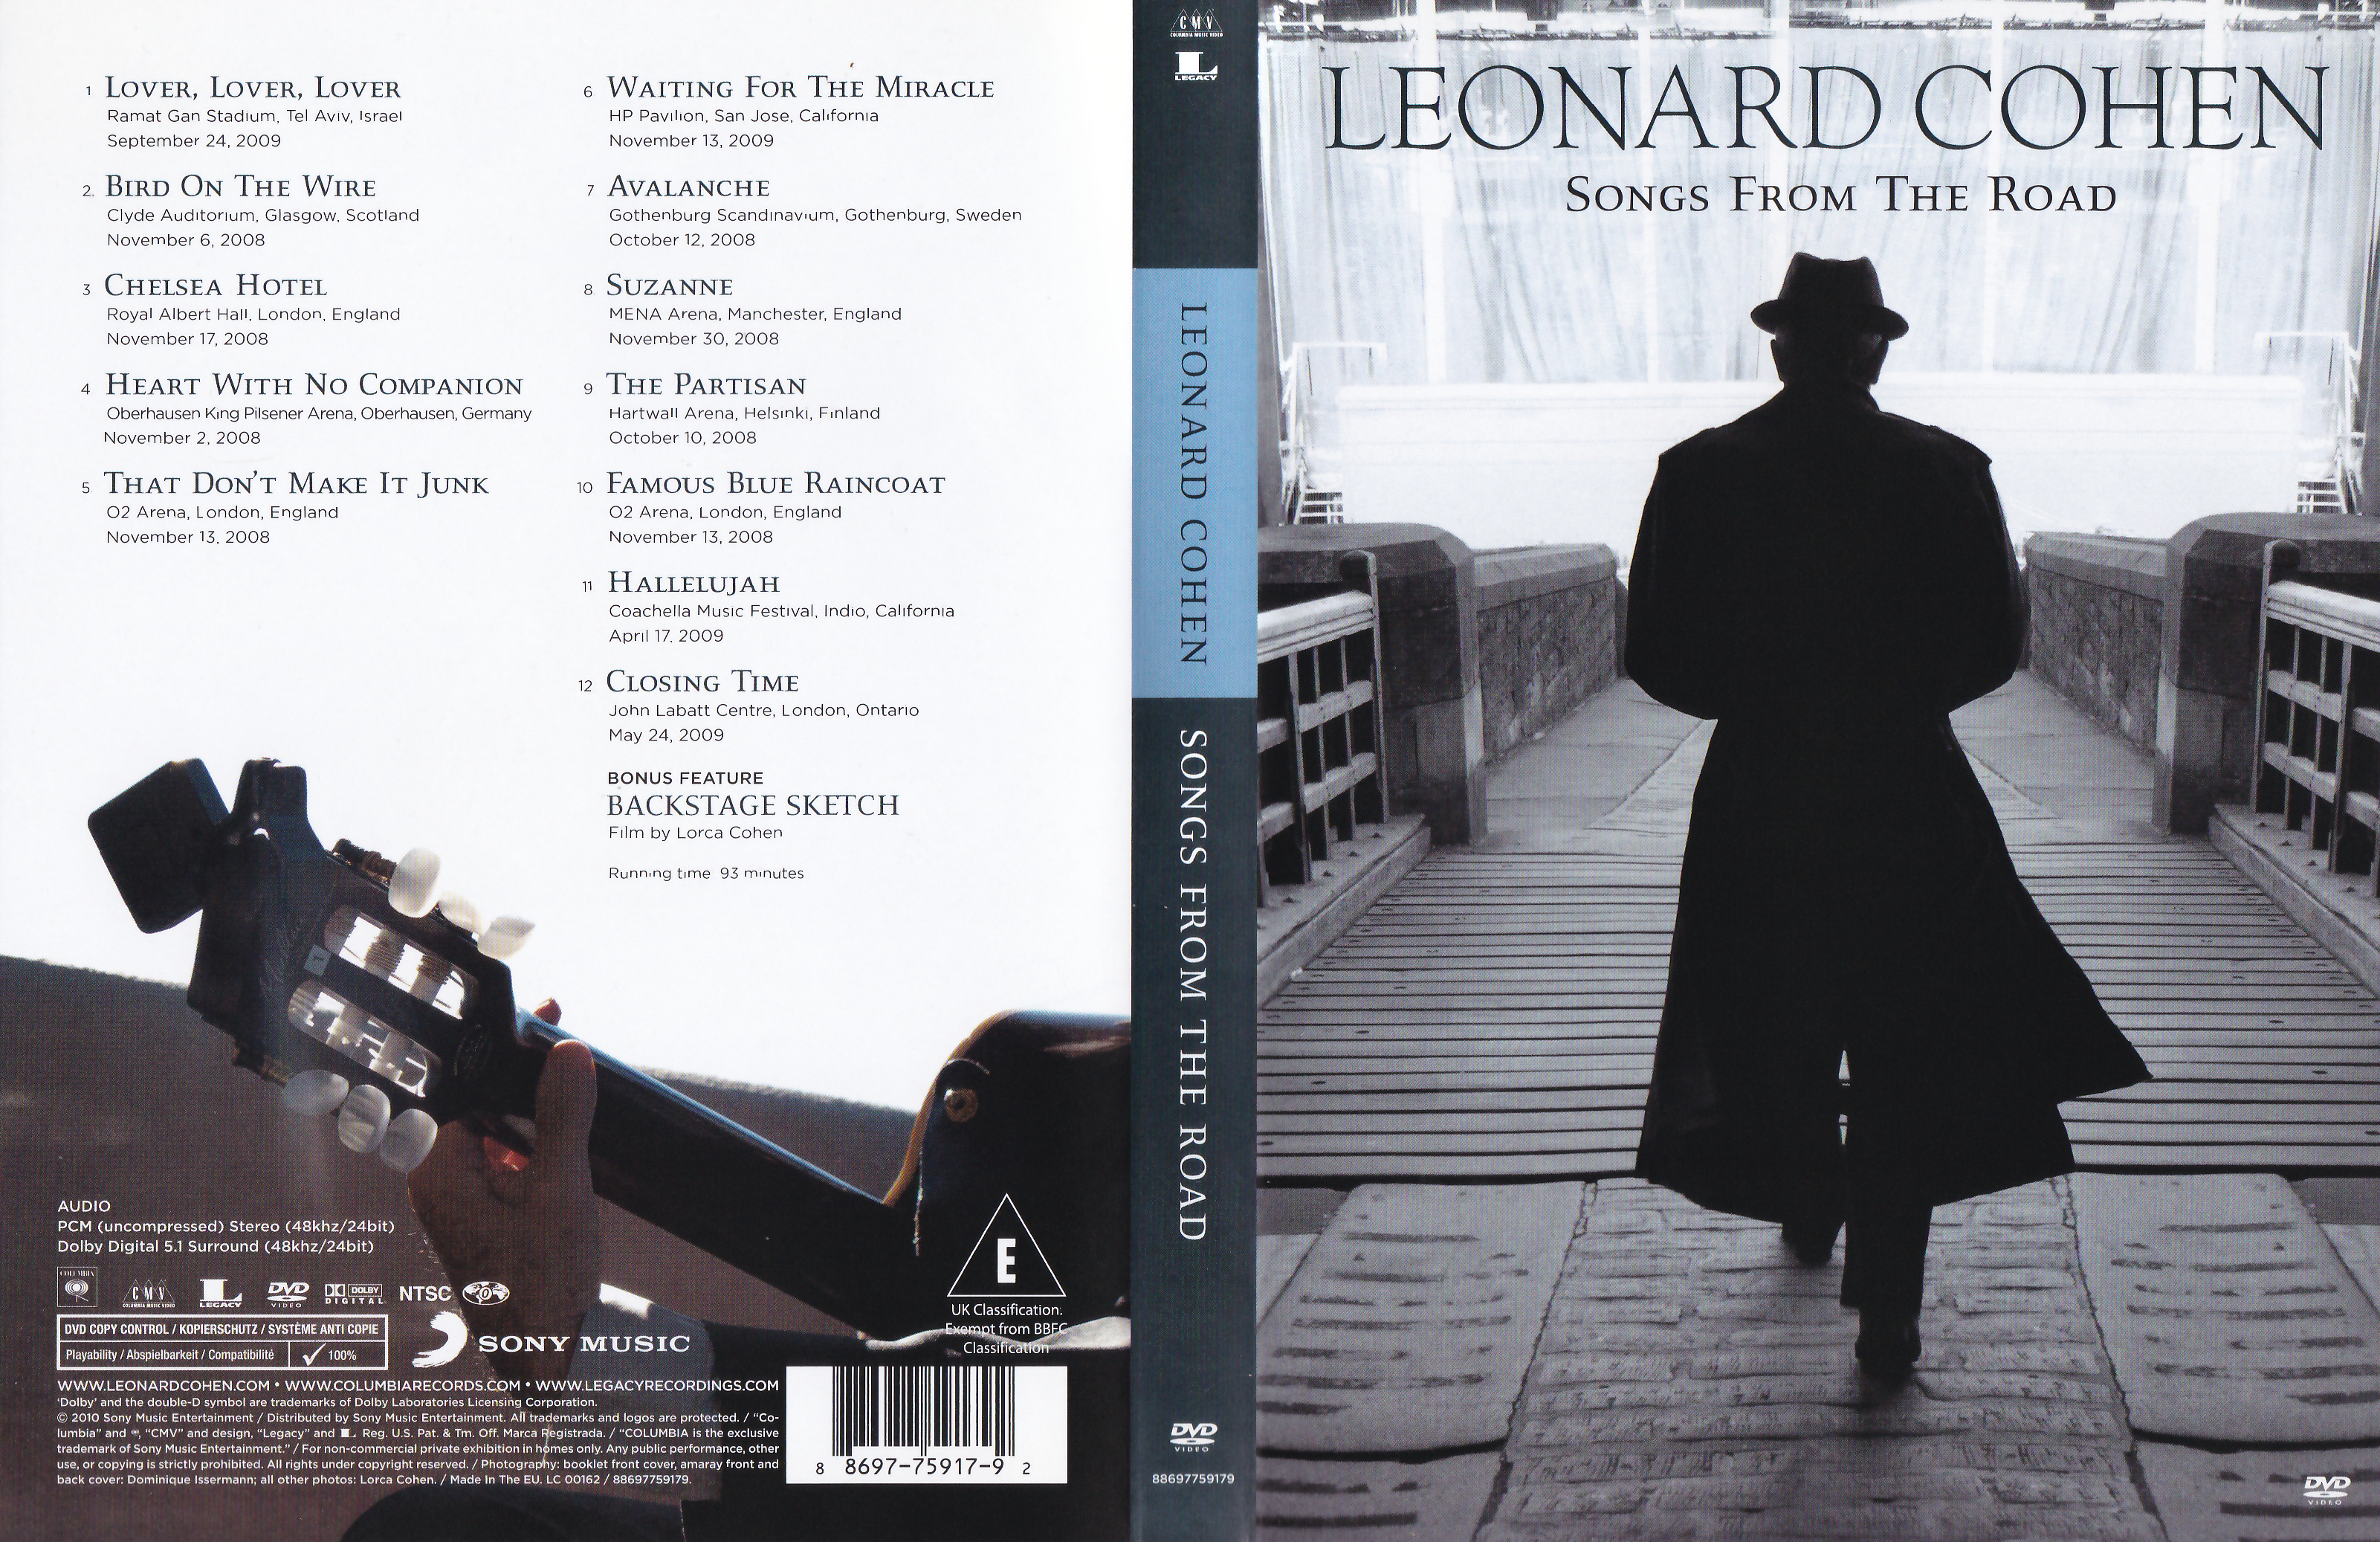 Jaquette DVD Leonard Cohen Songs From The Road 